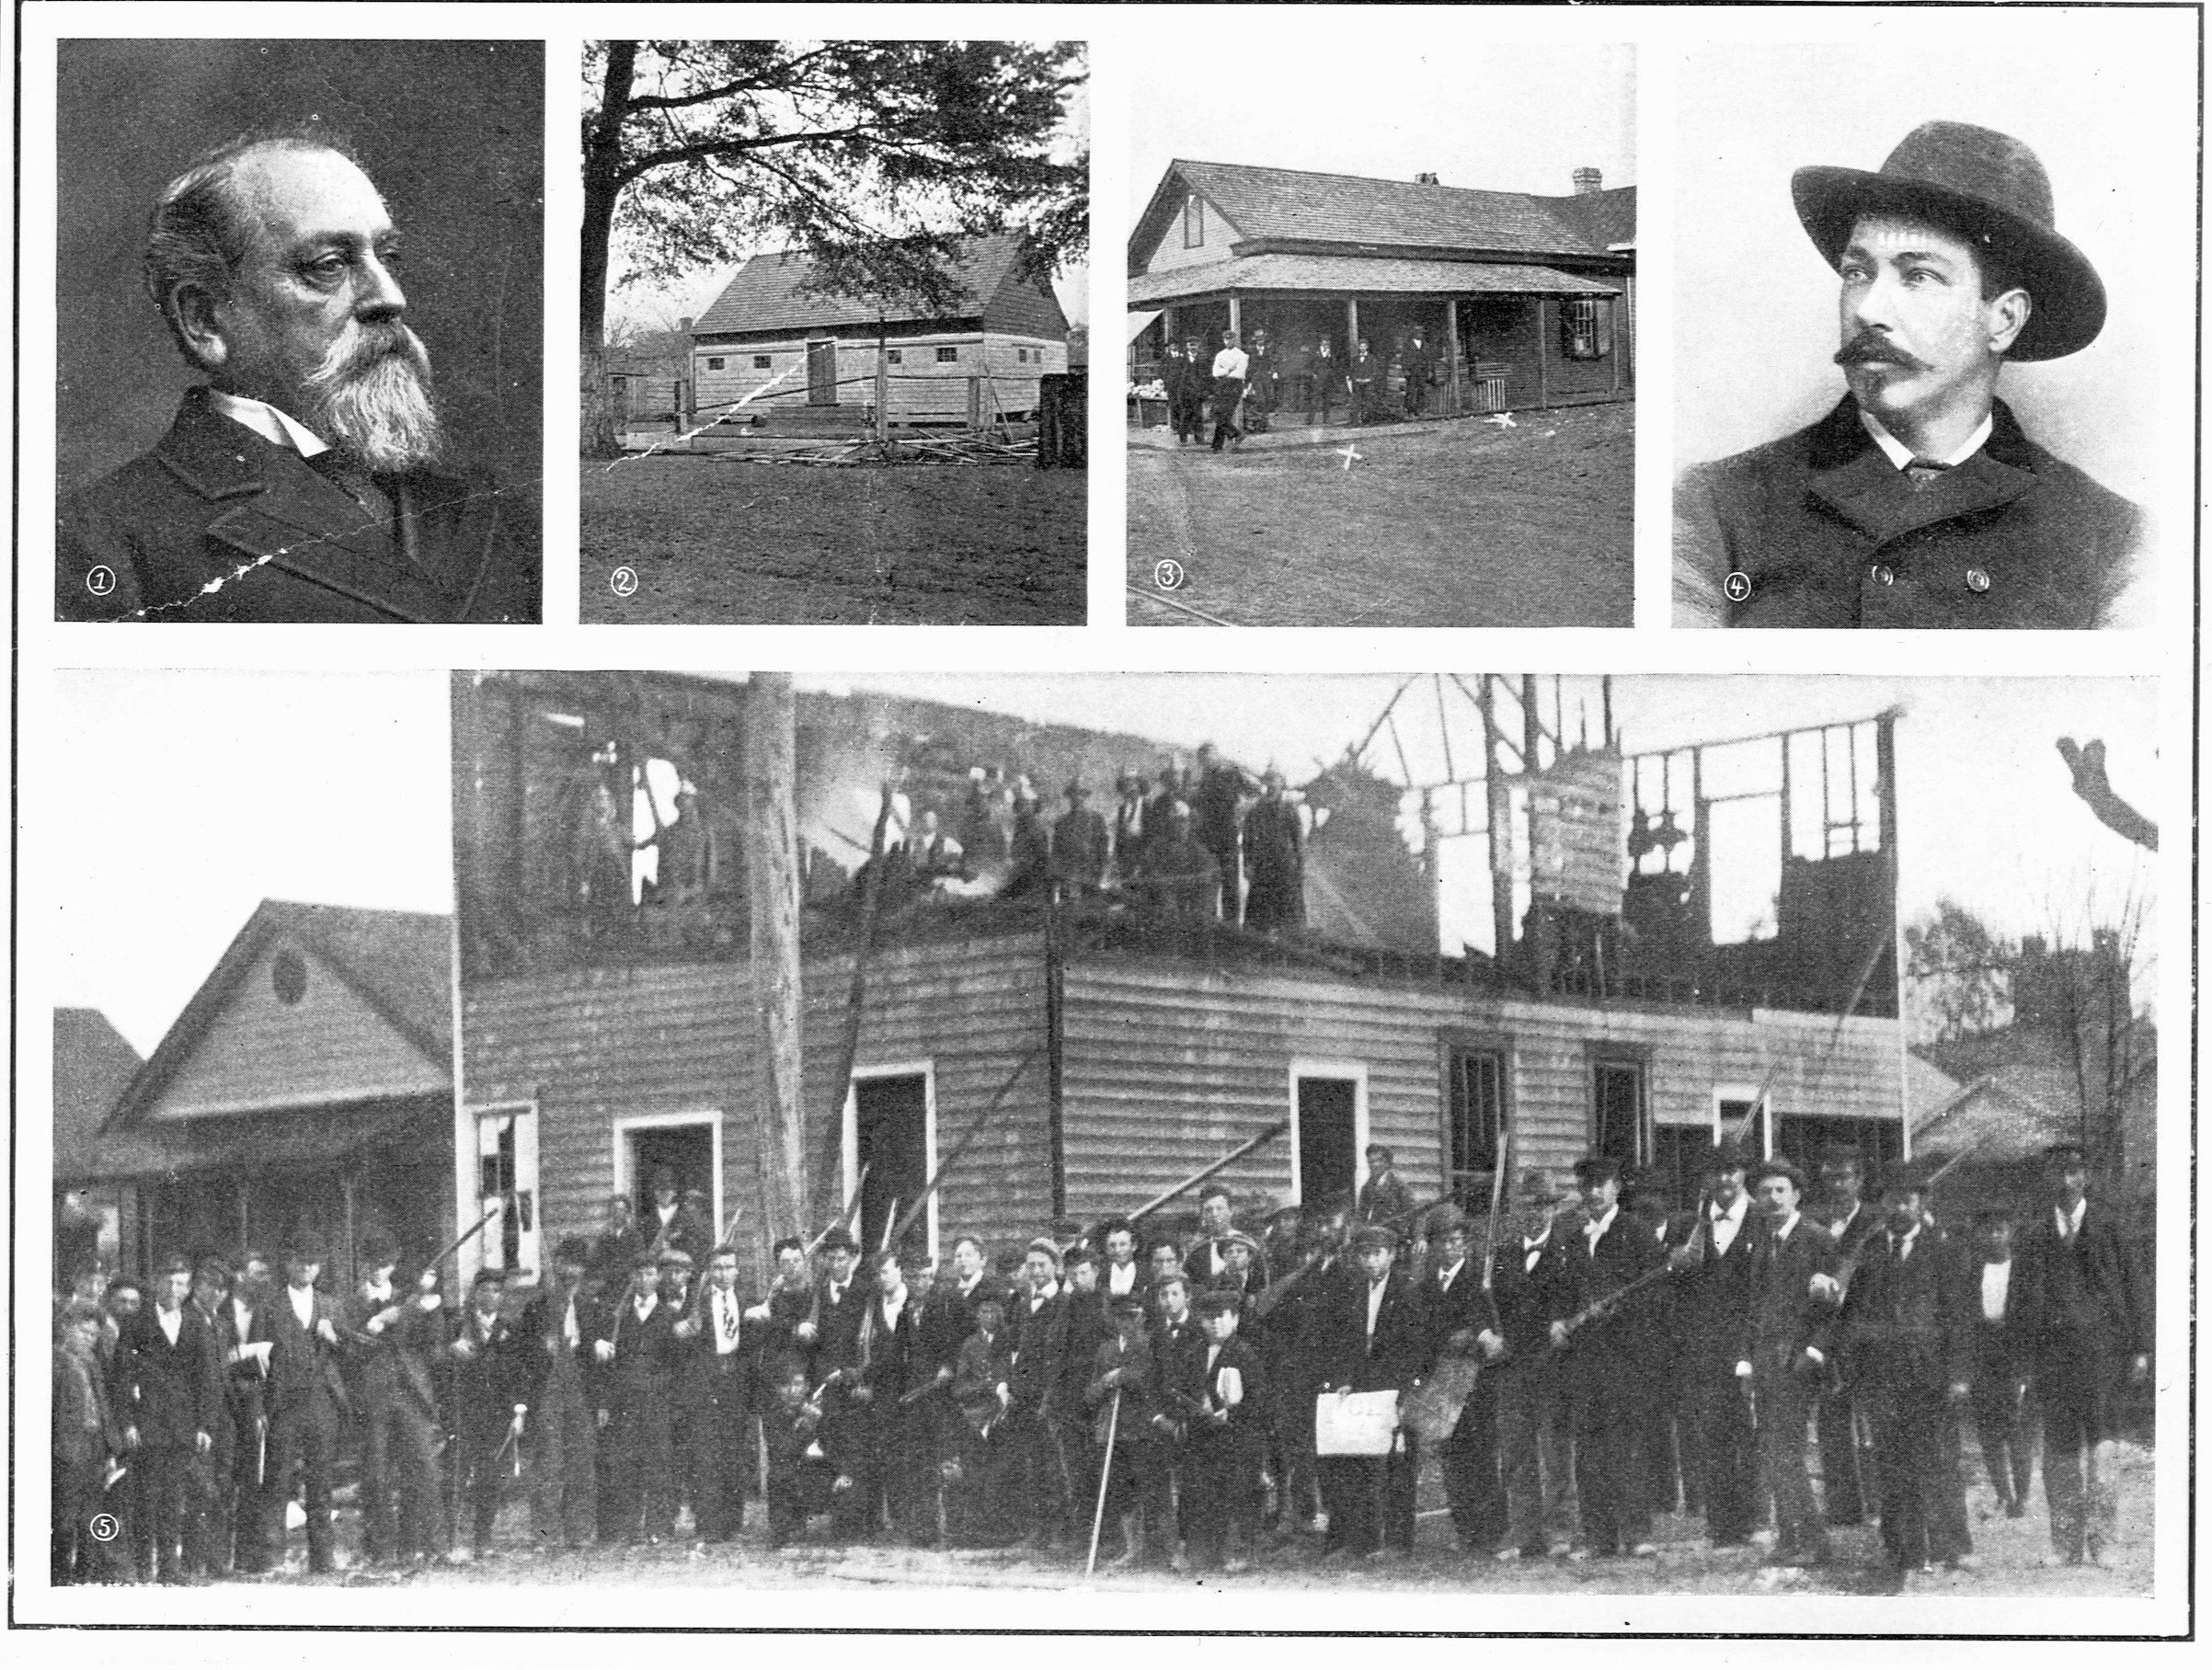 Coup in Wilmington, N.C., 1898: (1) Dr. S.P. Wright, the deposed mayor; (2) Armory, HQ of troops; (3) shanty where shooting took place; (4) Editor A.L. Manley, of the "Record"; (5) Naval reserves and troops escorting Black prisoners to jail (Library of Congress/Corbis/VCG /Getty Images)